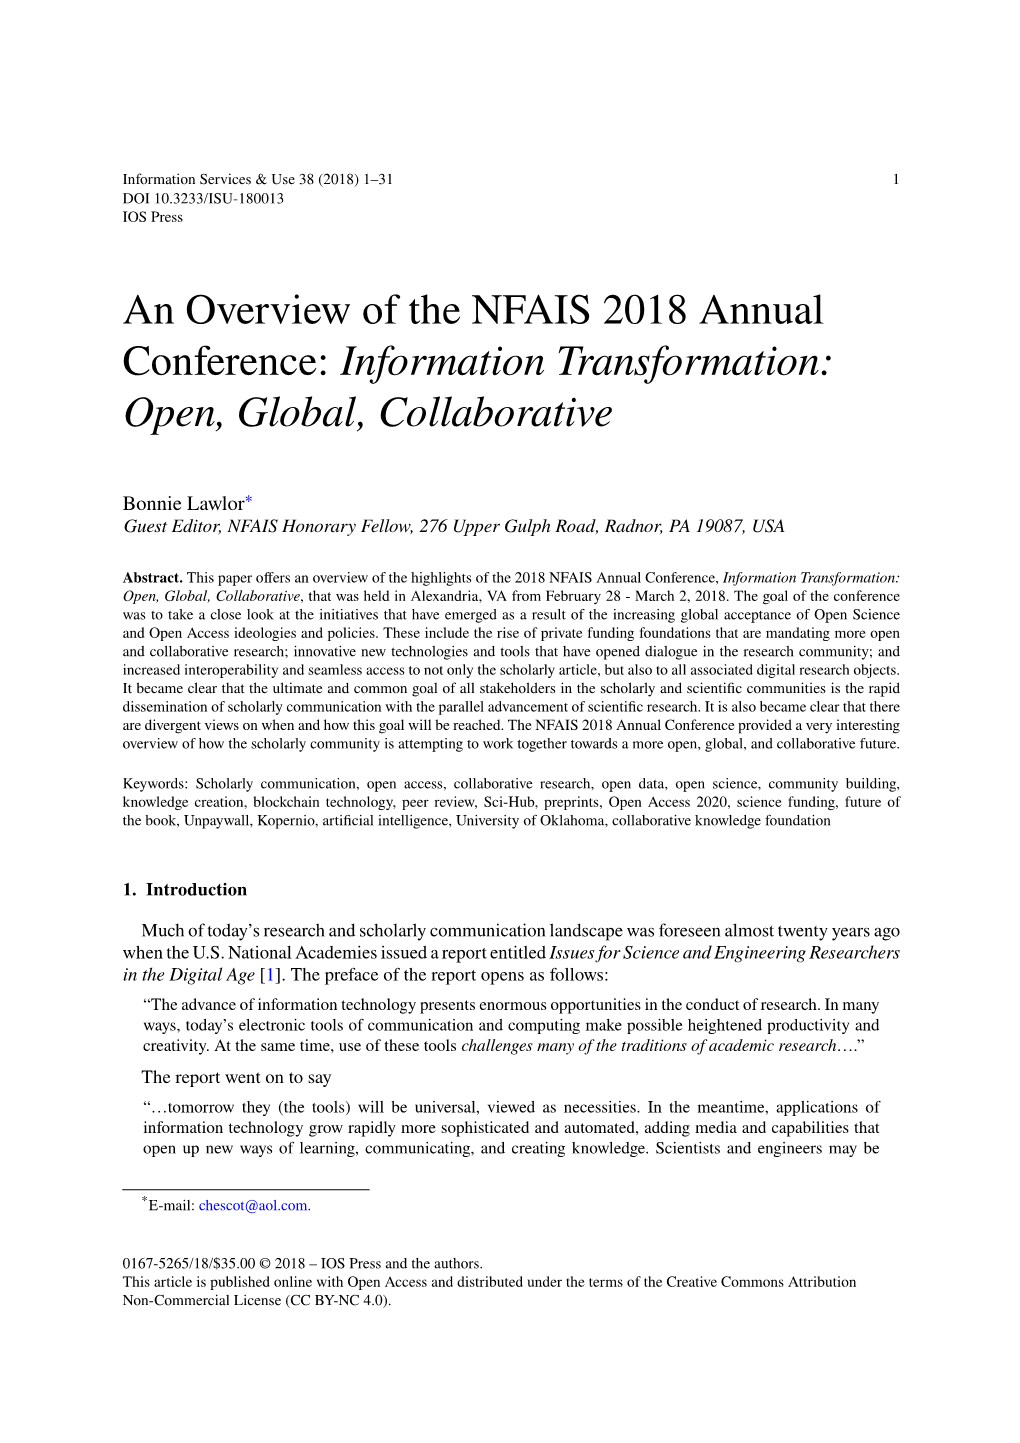 An Overview of the NFAIS 2018 Annual Conference: Information Transformation: Open, Global, Collaborative